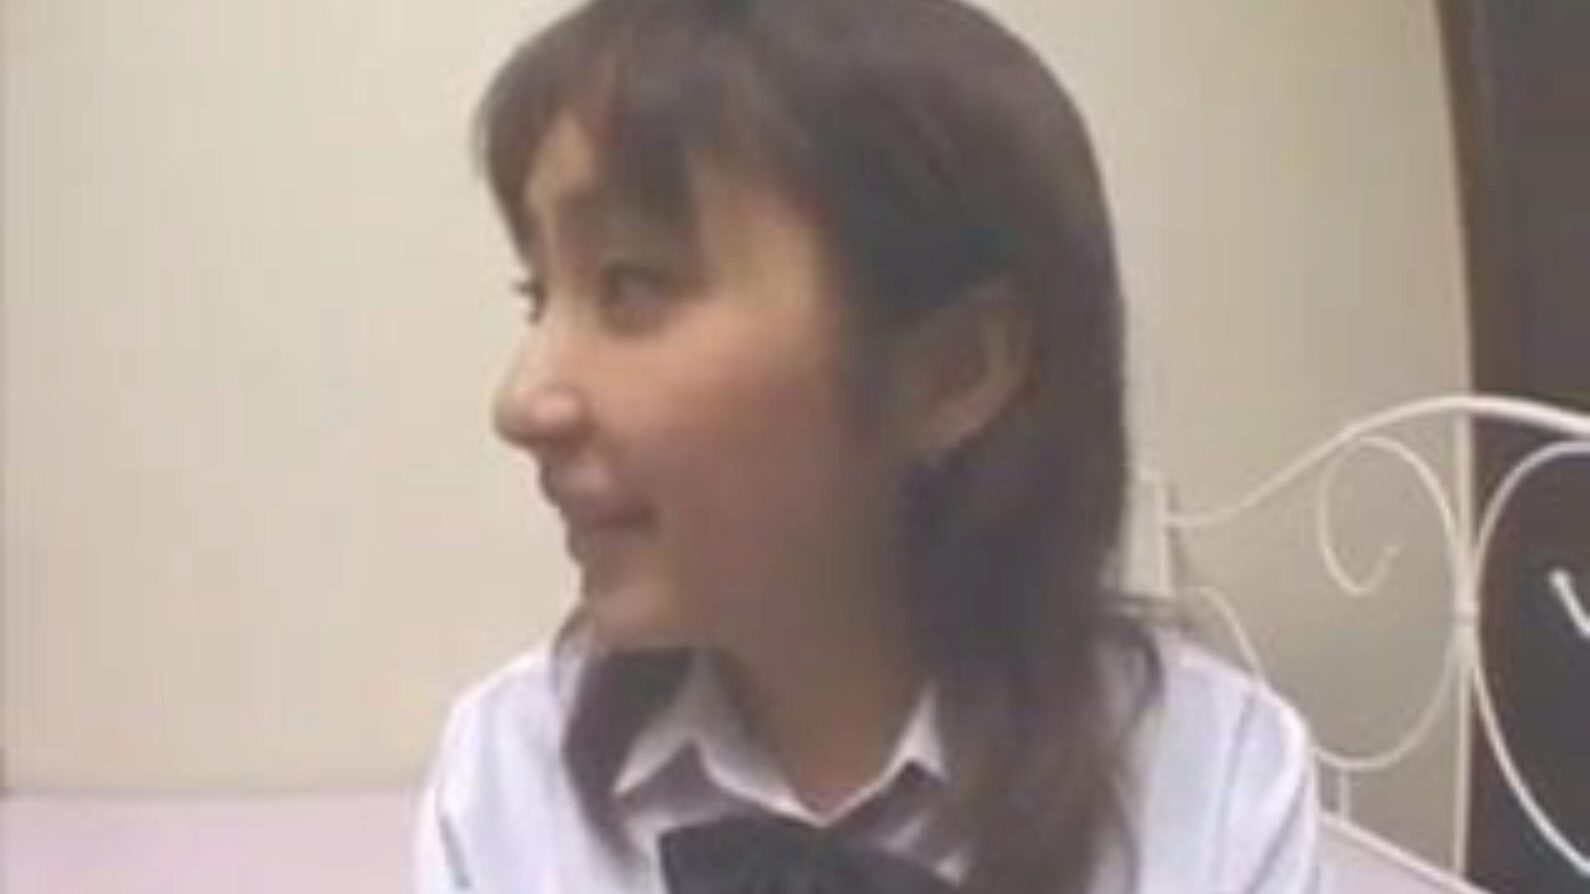 Haruka Hoshikawa Has Hairy Cunt Aroused and Fucked all Watch Haruka Hoshikawa Has Hairy Cunt Aroused and Fucked all the W clip on xHamster - the ultimate archive of free-for-all Asian Japanese porno tube movie scenes